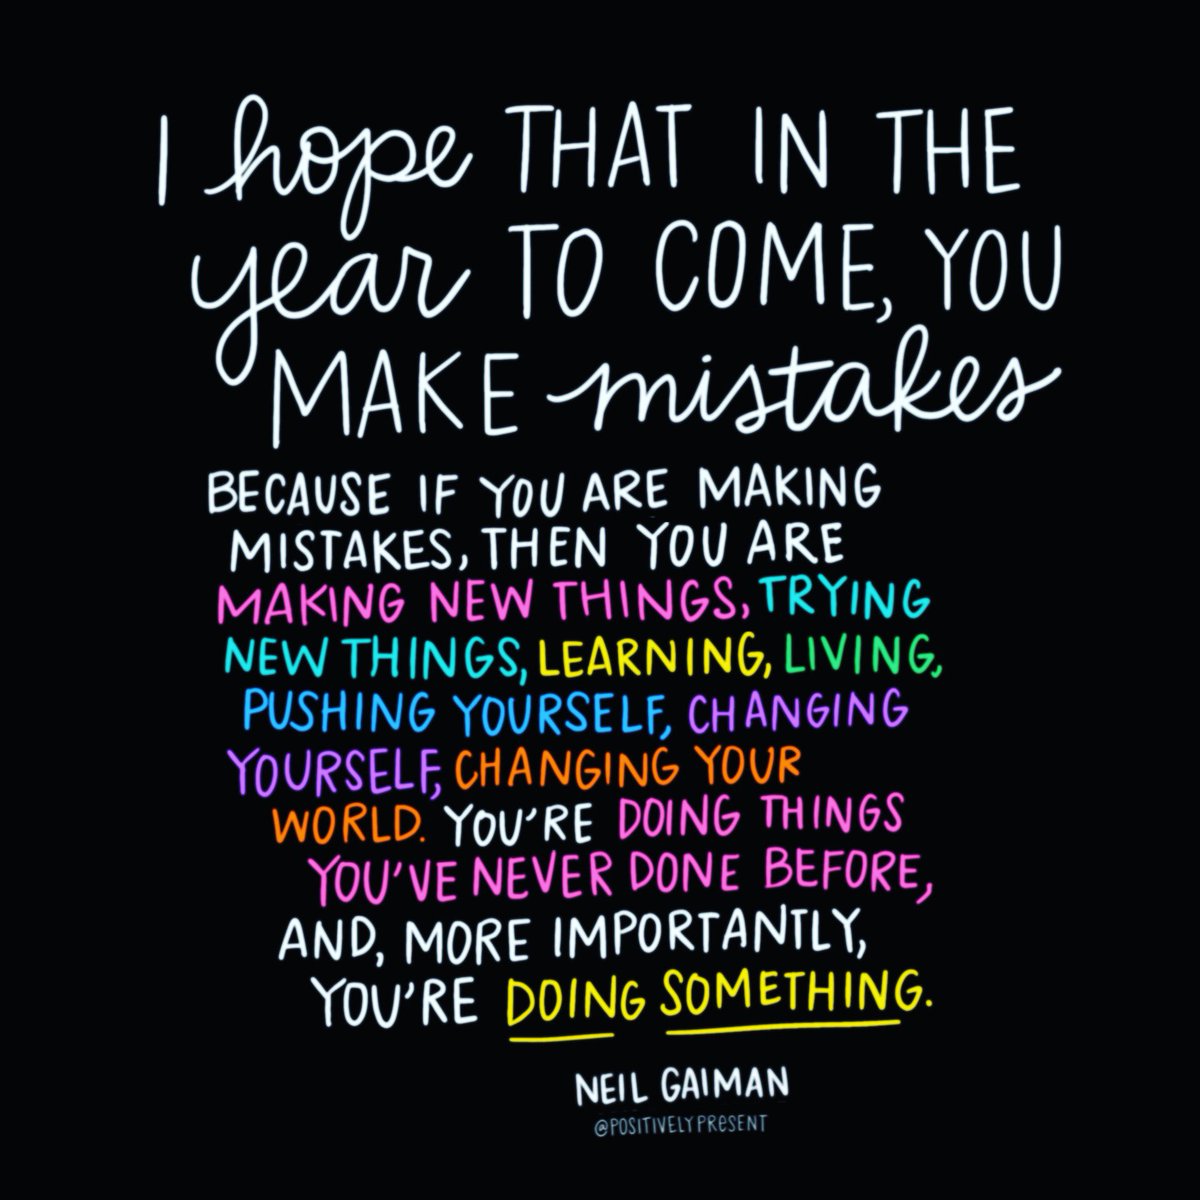 Education Support Don T Be Afraid To Make Mistakes And Try Something New Growthmindset Makingmistakes